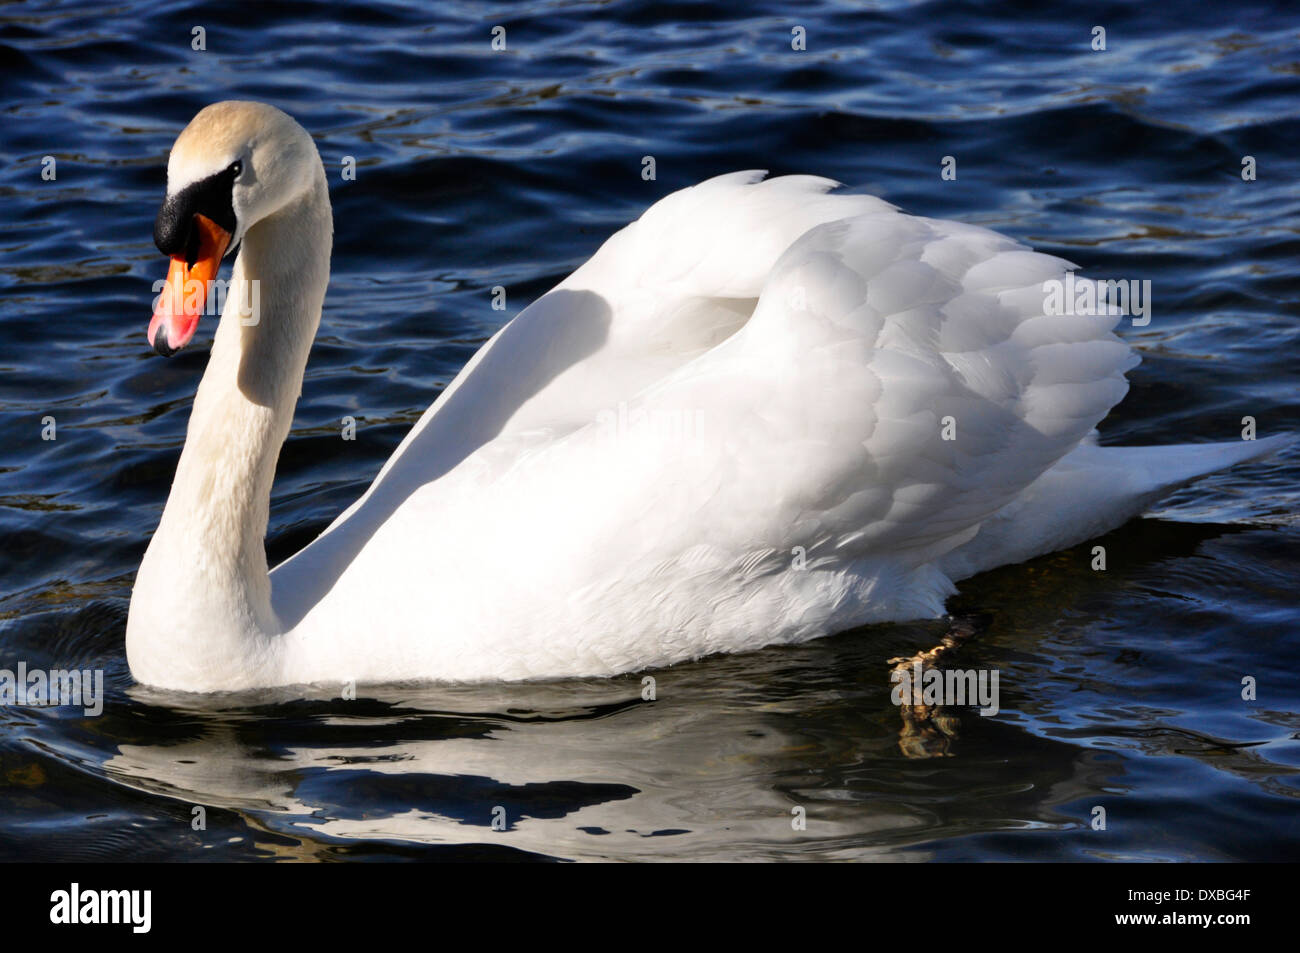 Adult swan - full plumage - graceful on a lake - bright sunlight - contrasts white against dark rippling waters Stock Photo